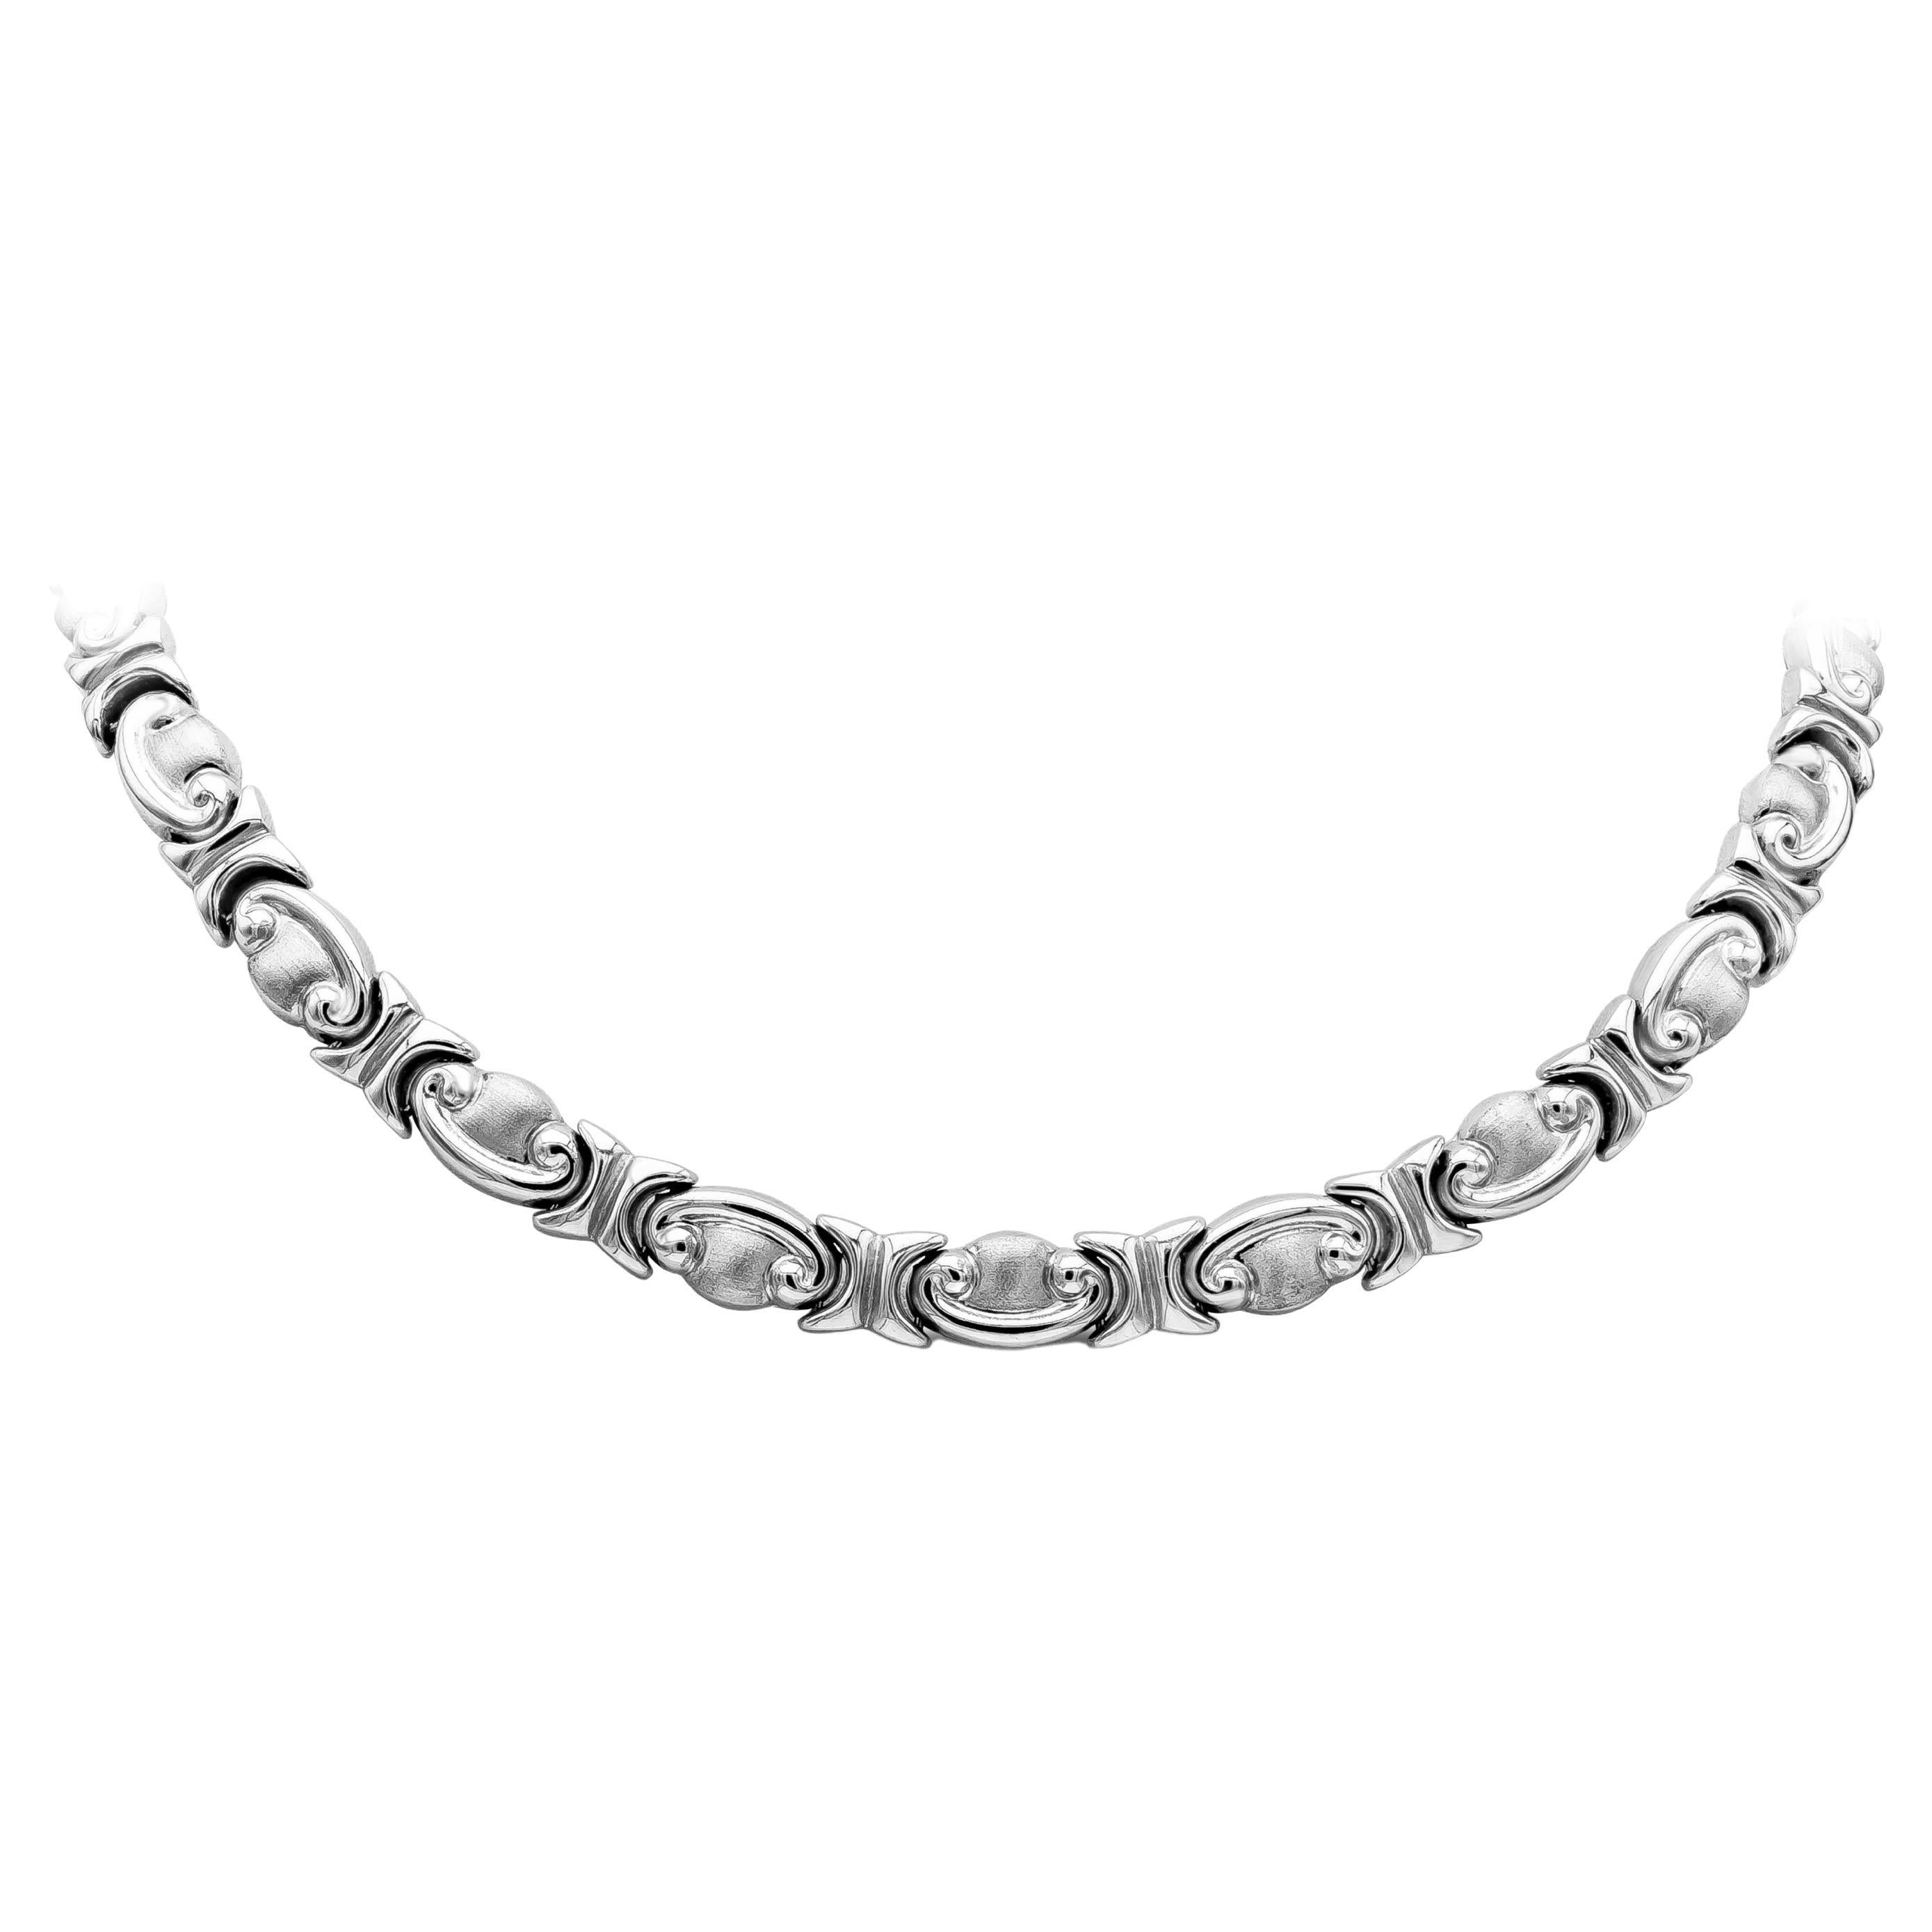 Ancient Greek Roman Style White Gold Necklace